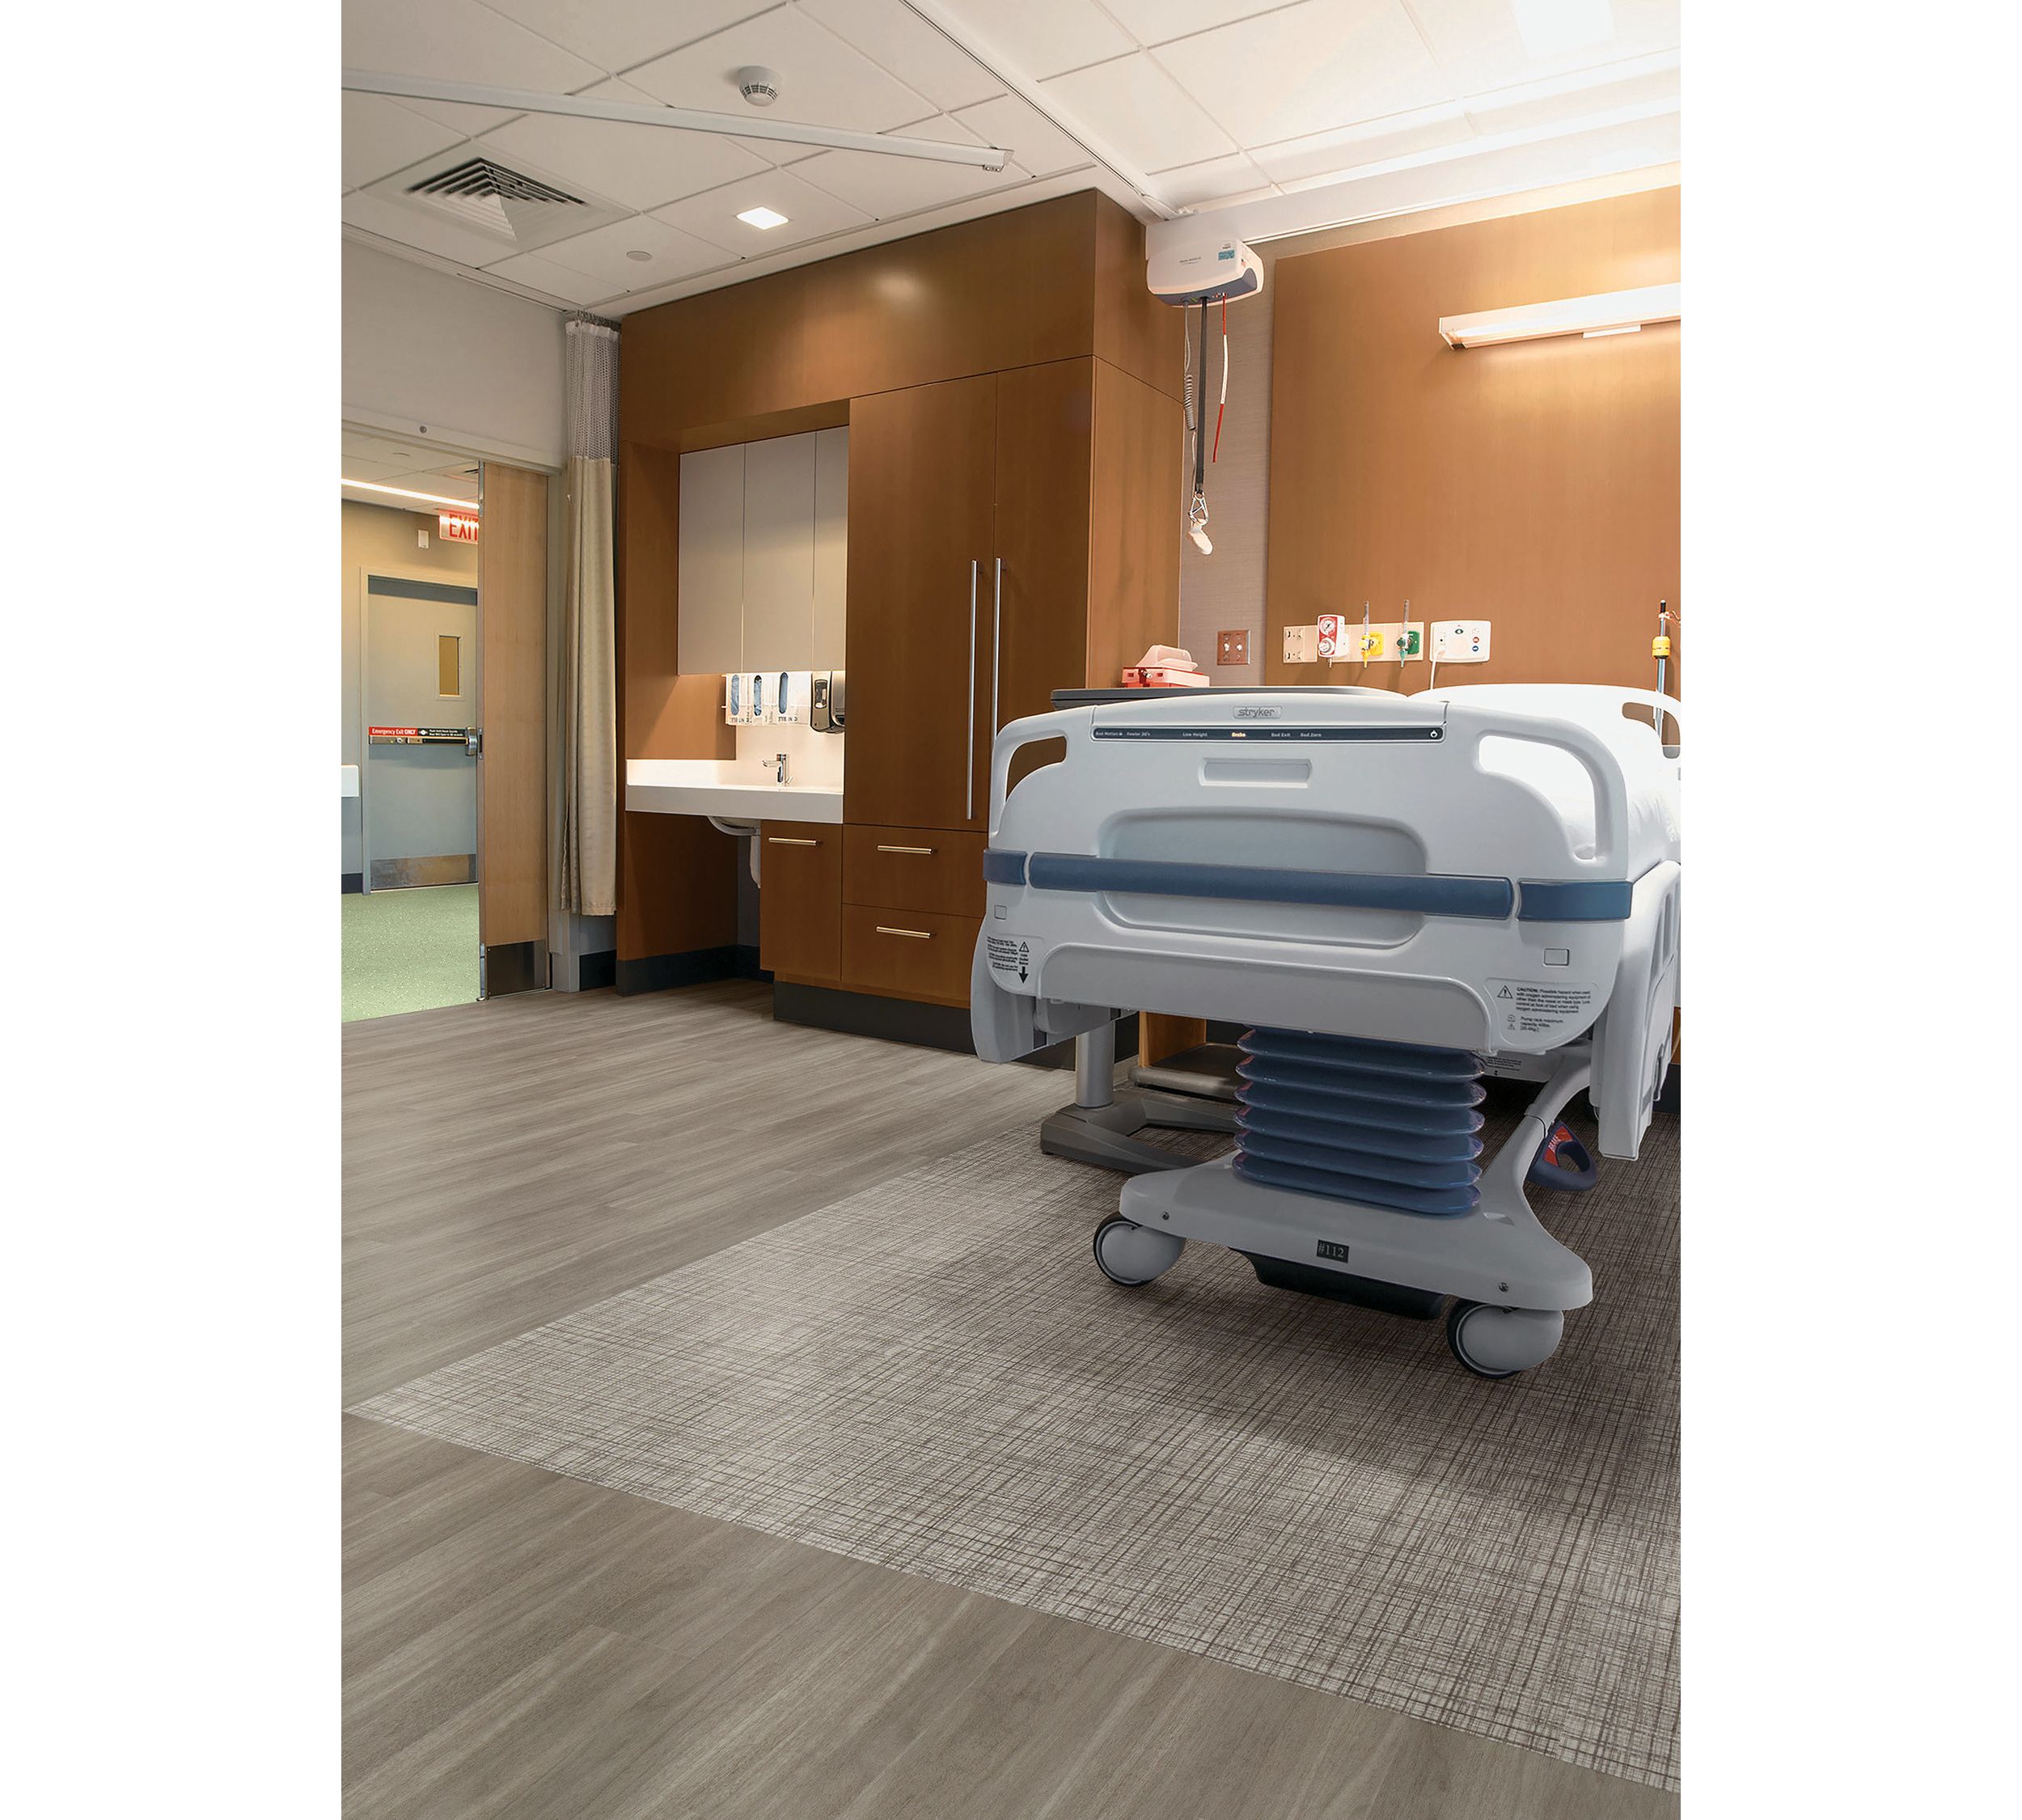 Interface Criterion Classic Woodgrains and Criterion Classic Wovens LVT in patient room with hospital bed  número de imagen 3